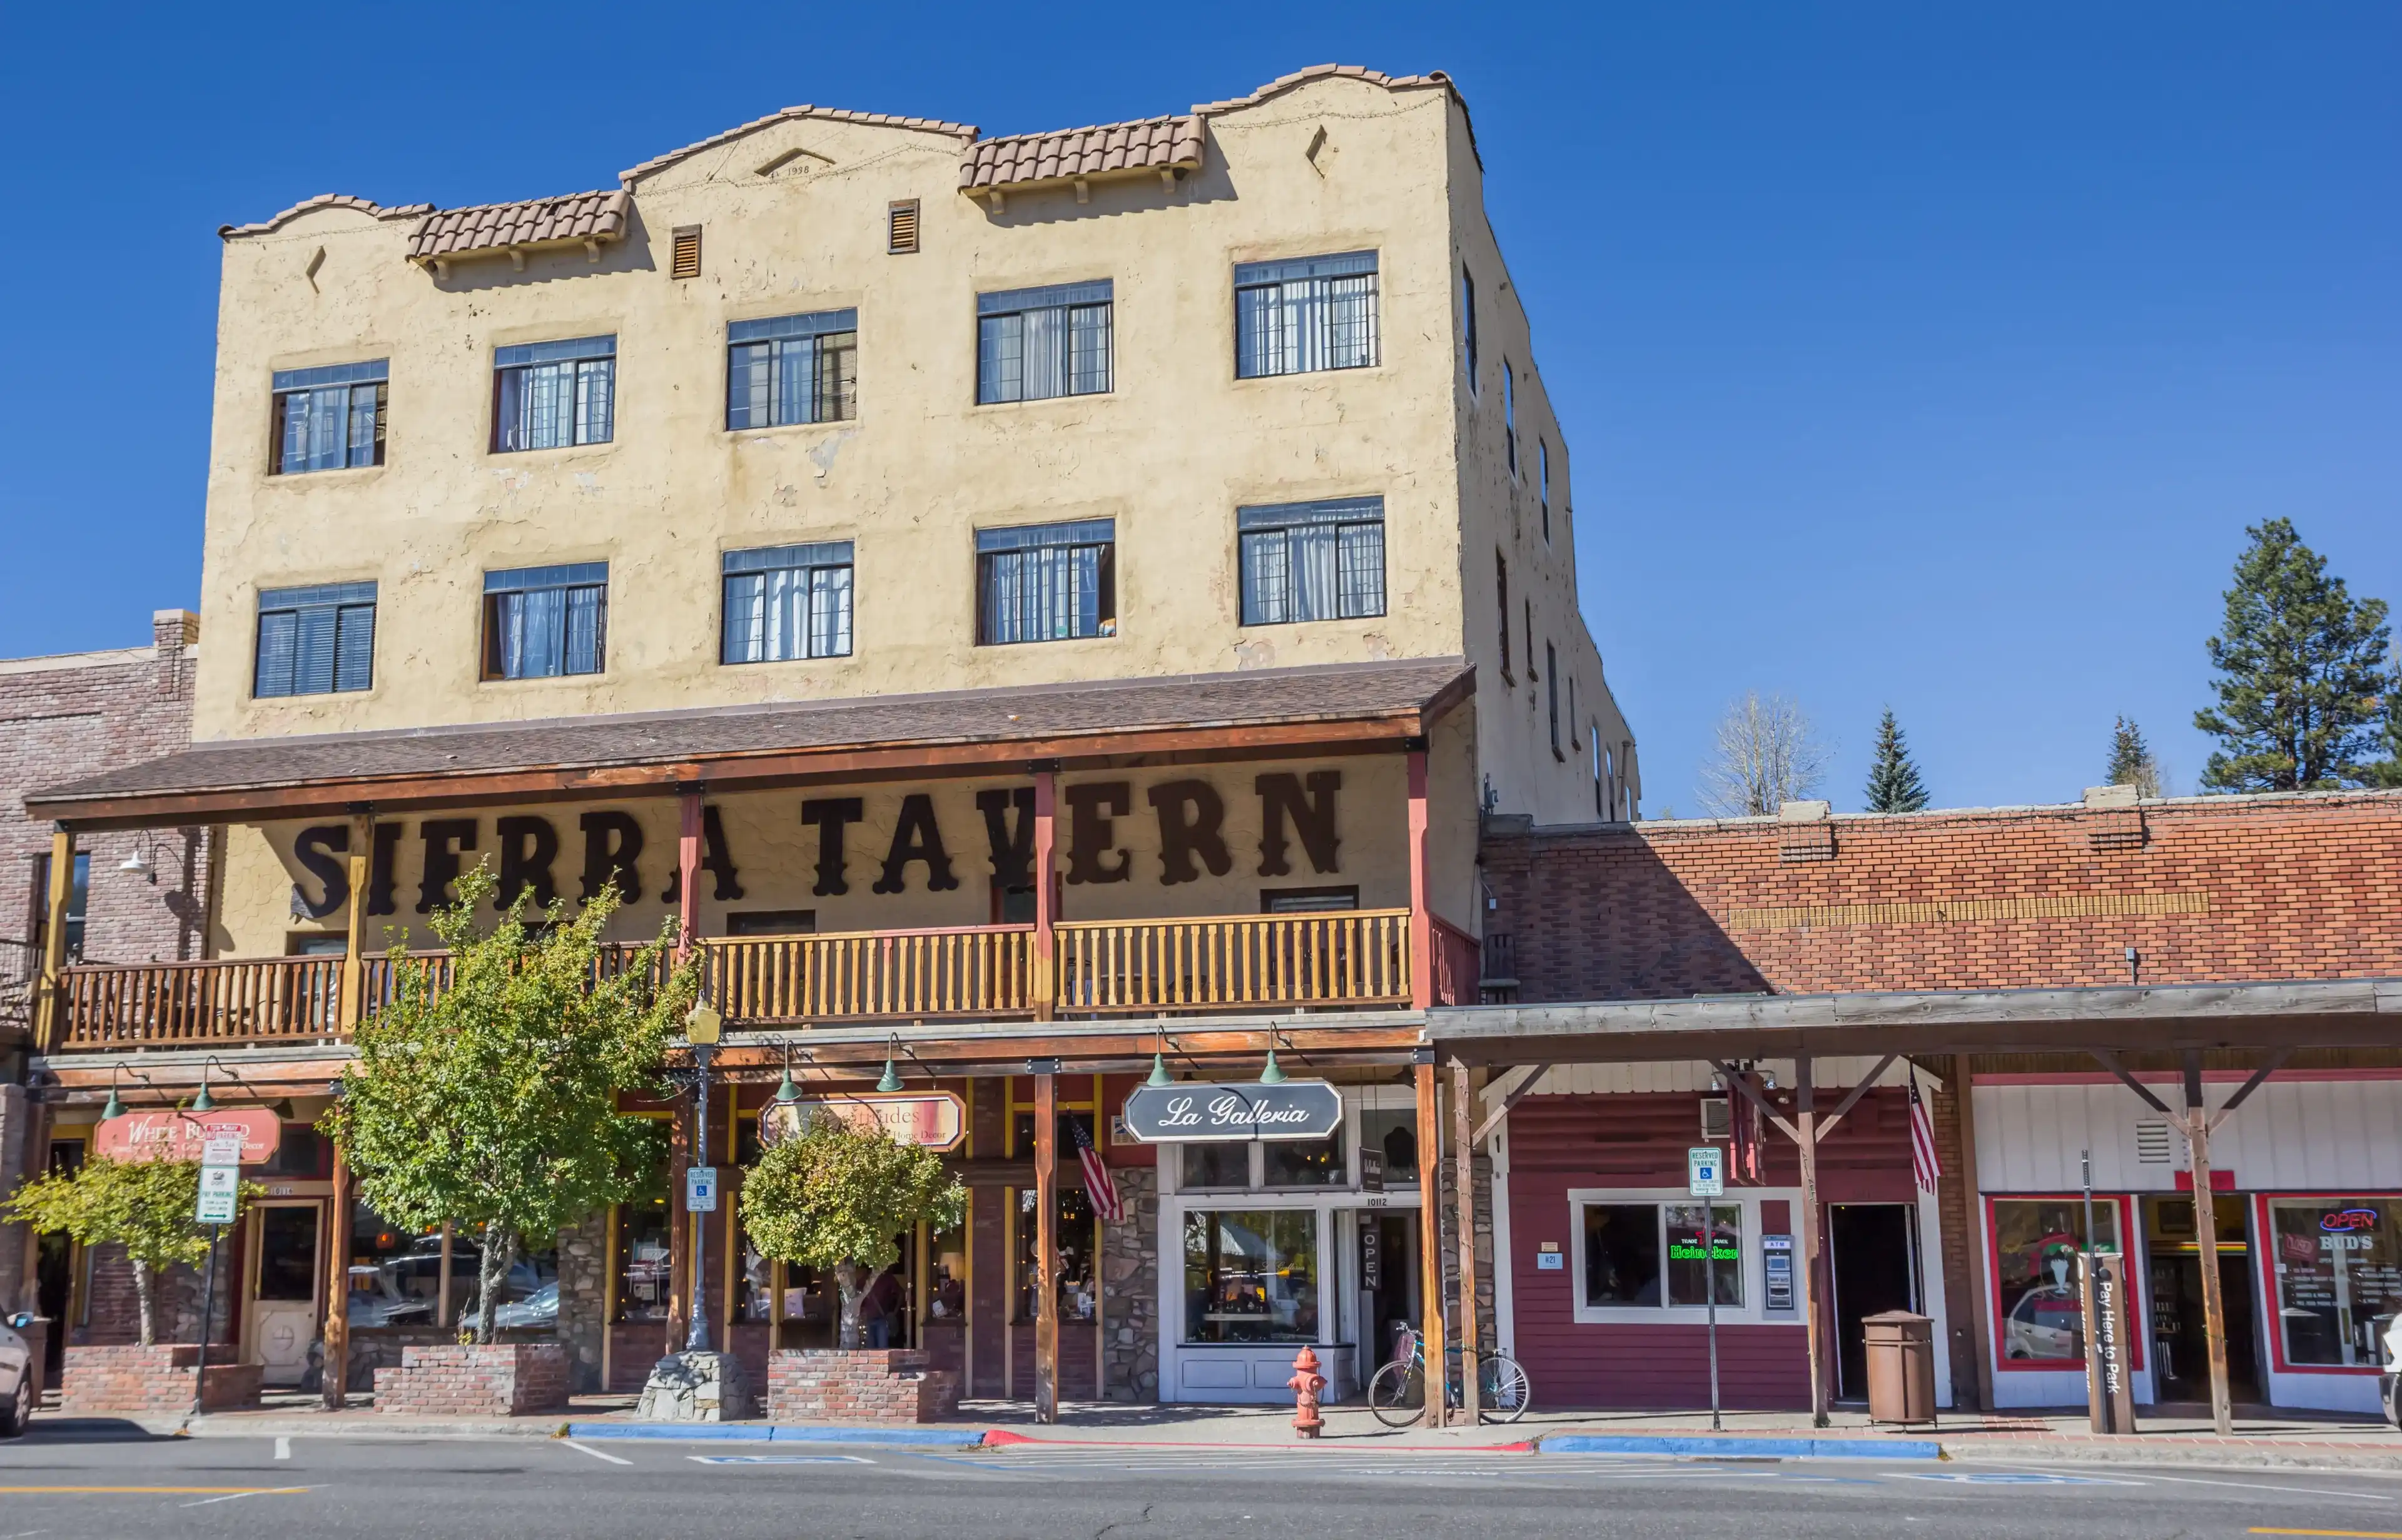  Best Truckee hotels. Cheap hotels in Truckee, California, United States